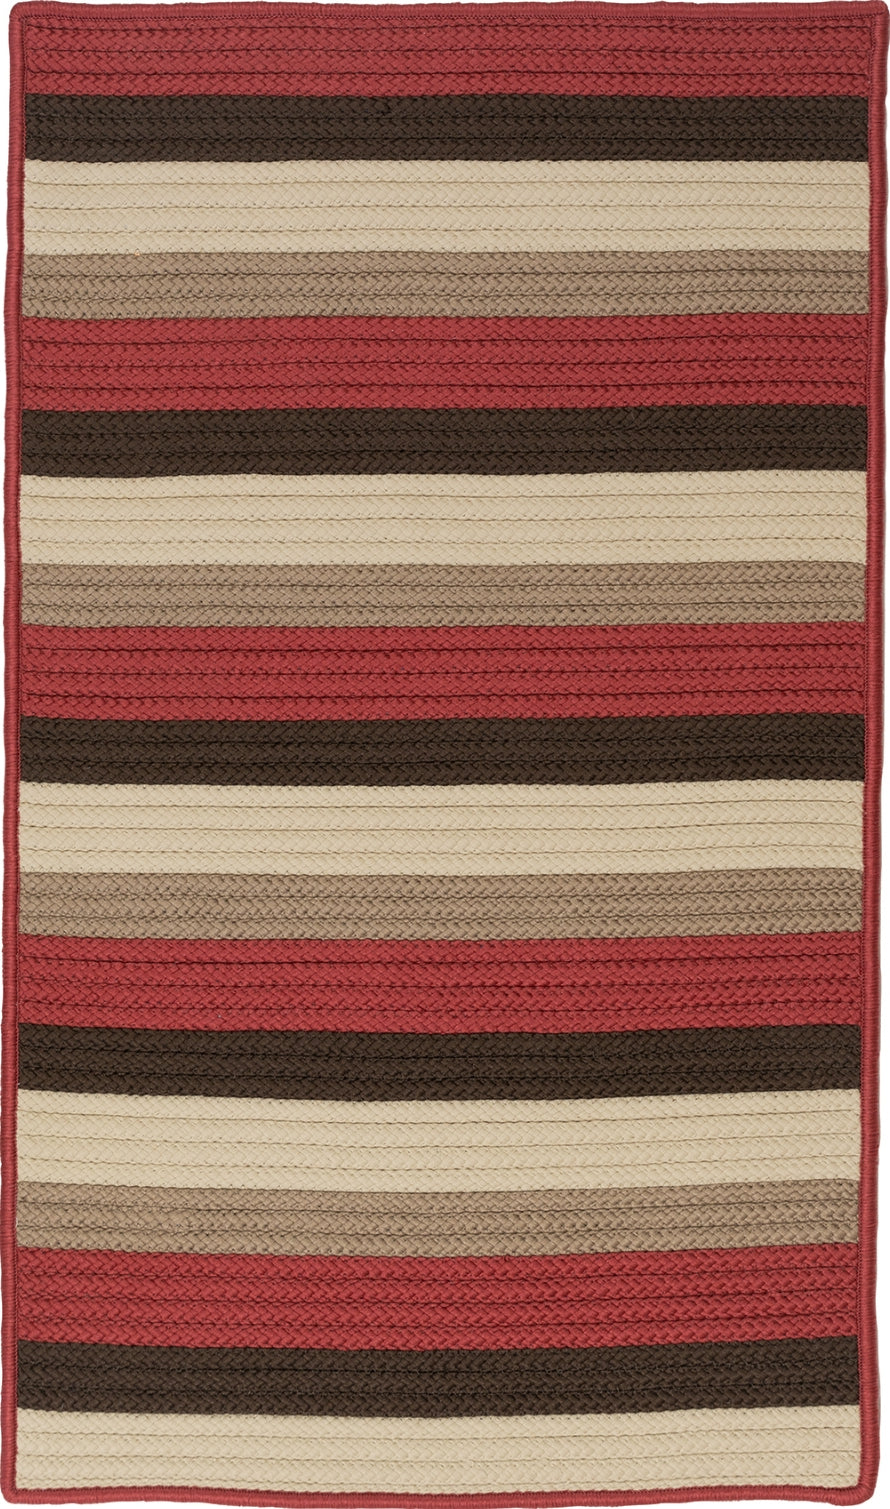 Colonial Mills Norwood NW45 Red Brown Area Rug